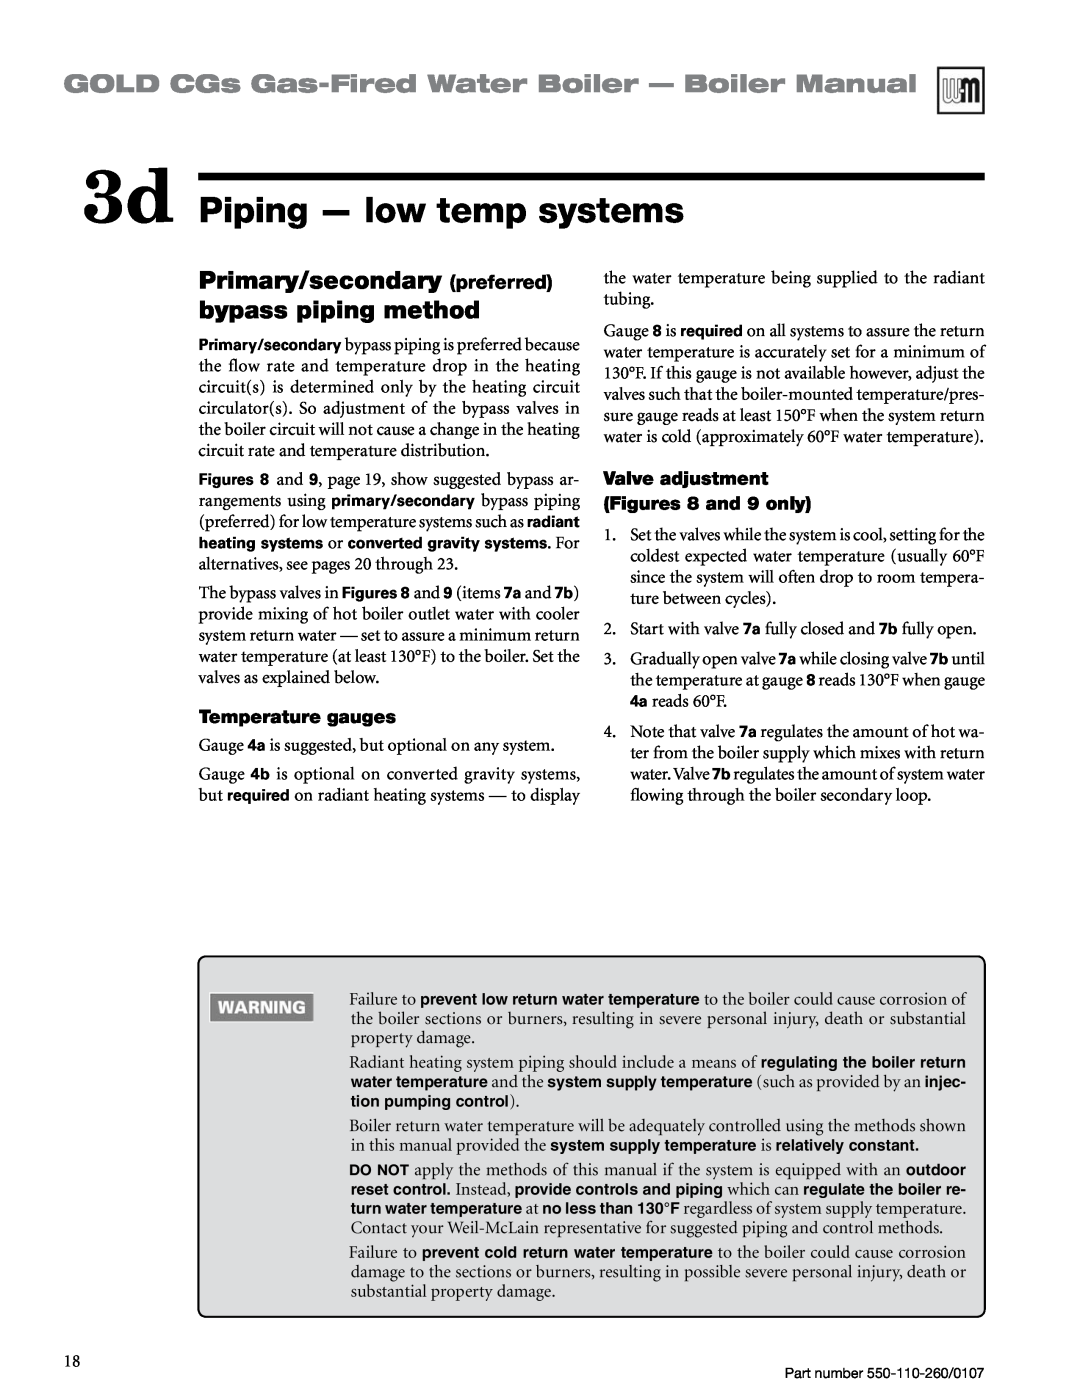 Weil-McLain 550-110-260/0107 manual 3d Piping — low temp systems, Primary/secondary preferred bypass piping method 